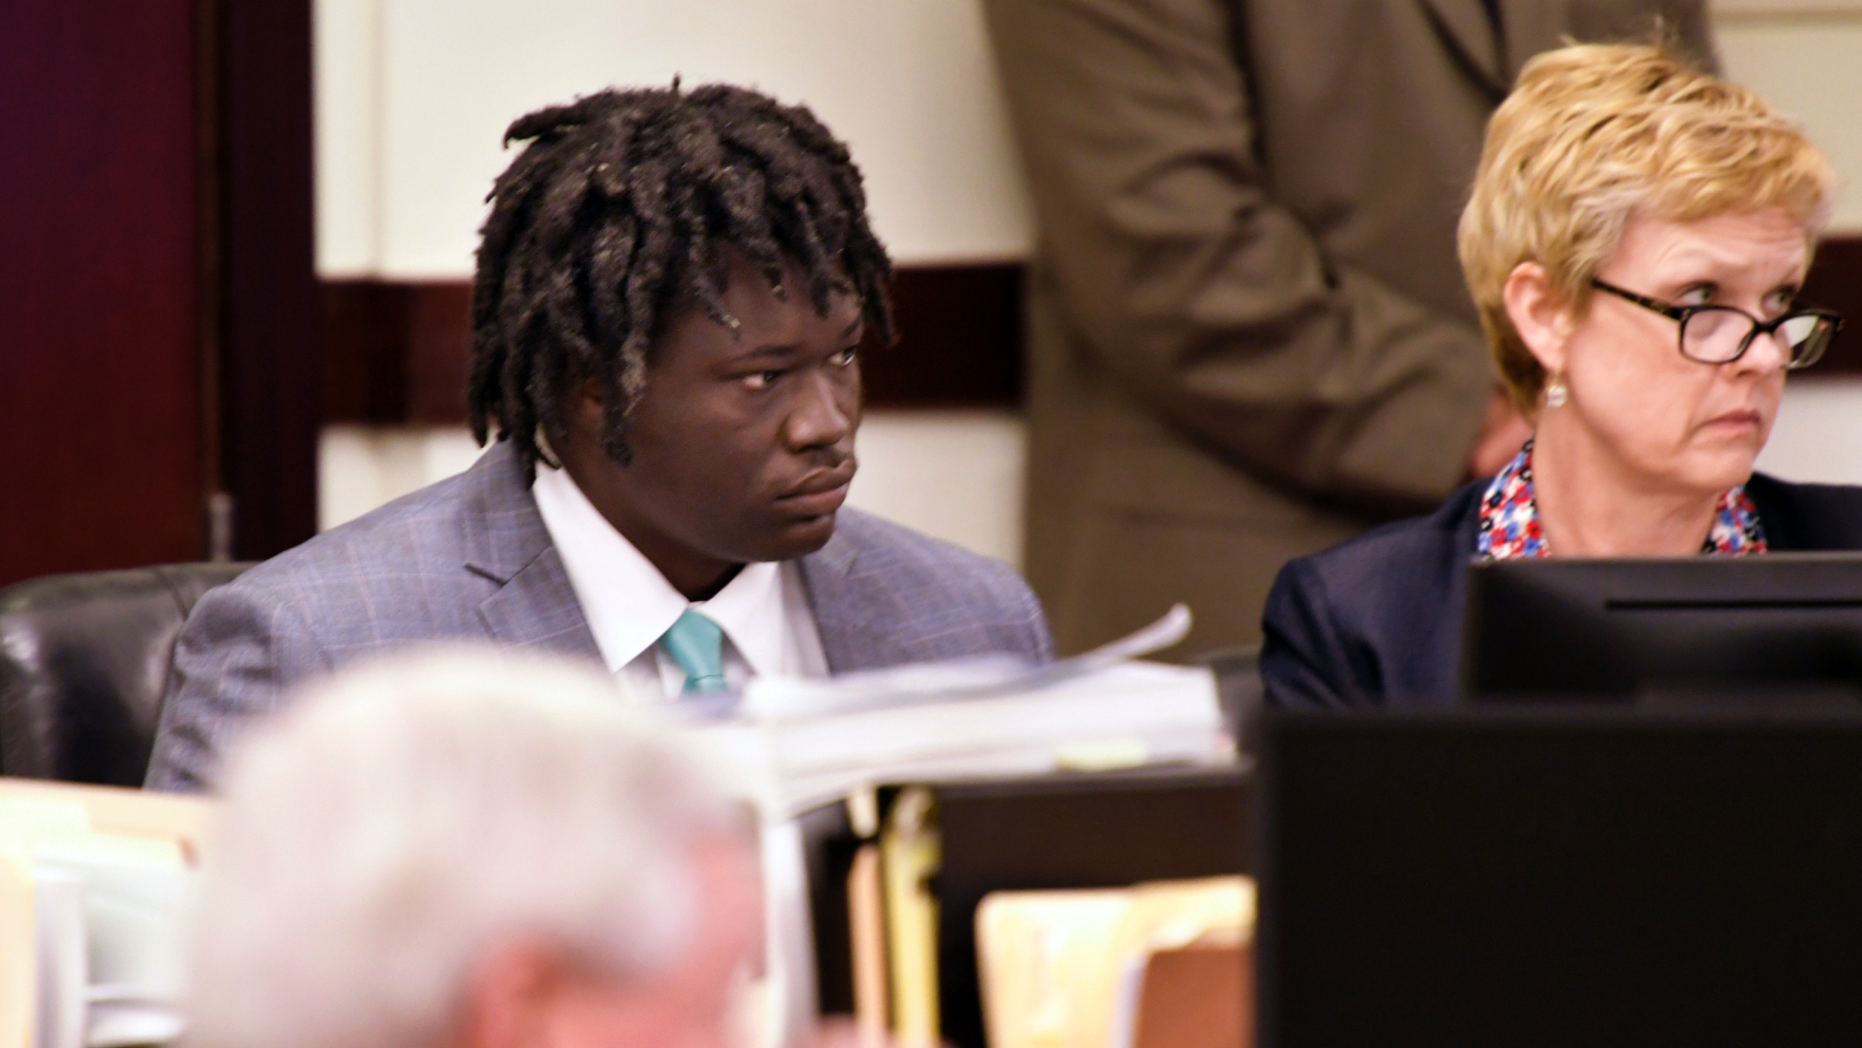 Emanuel Kidega Samson sits in court while the verdict is handed down in his murder trial on Friday, May 24, 2019 in Nashville, Tennessee. Samson was convicted of first-degree murder in a Nashville church shootout two years ago, leaving one woman dead and seven wounded. The jurors deliberated less than five hours before declaring Samson guilty on the 43 charges set out in the indictment. (Shelley Mays / The Tennessean via AP, Pool)